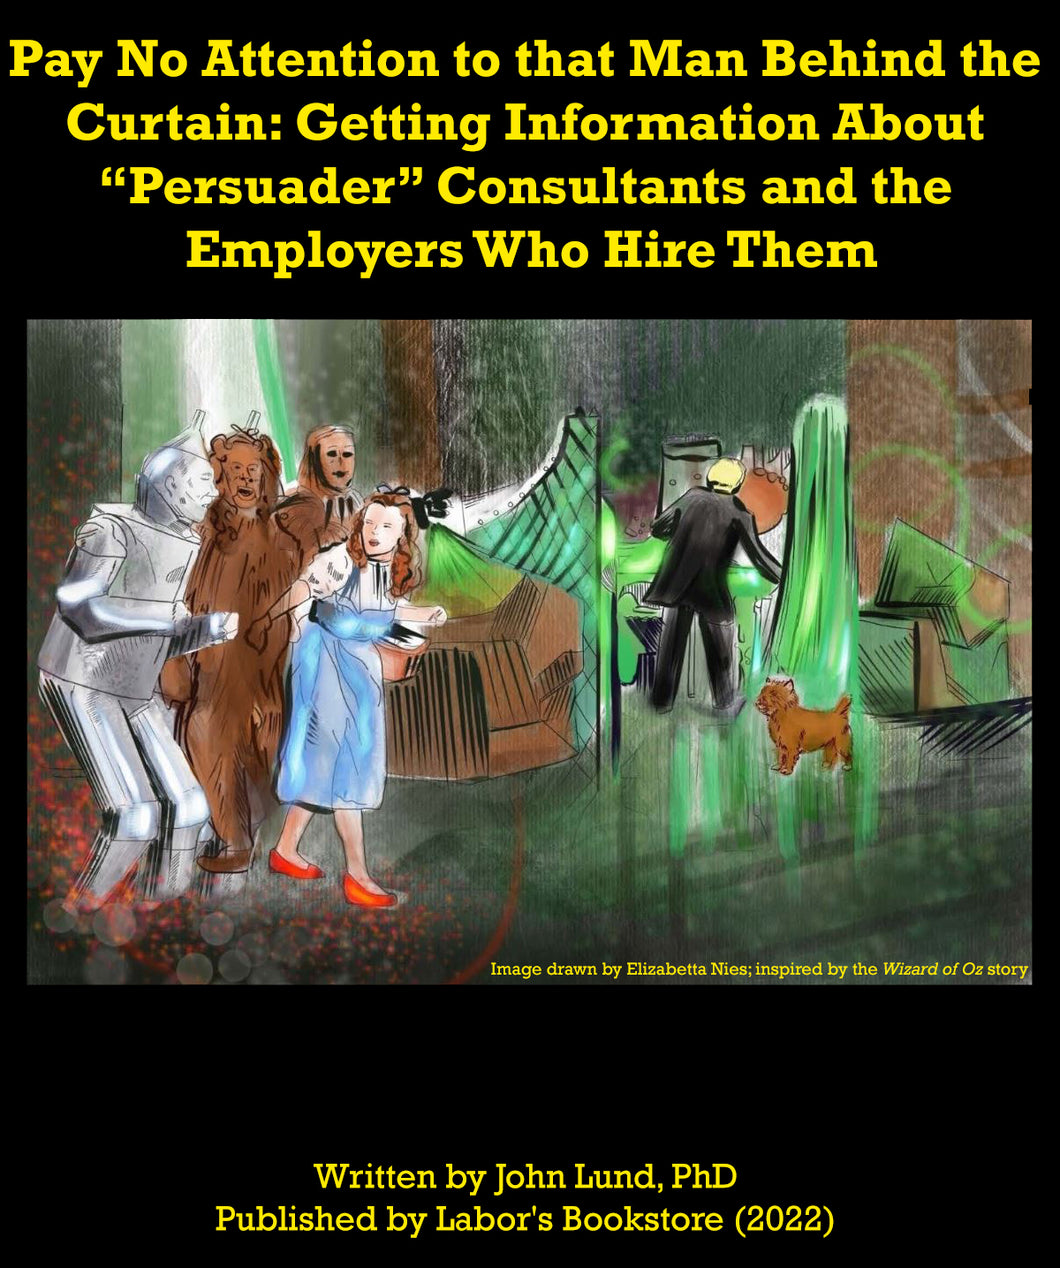 Pay No Attention to that Man Behind the Curtain: Getting Information About “persuader” Consultants and the Employers Who Hire Them  - PDF Download